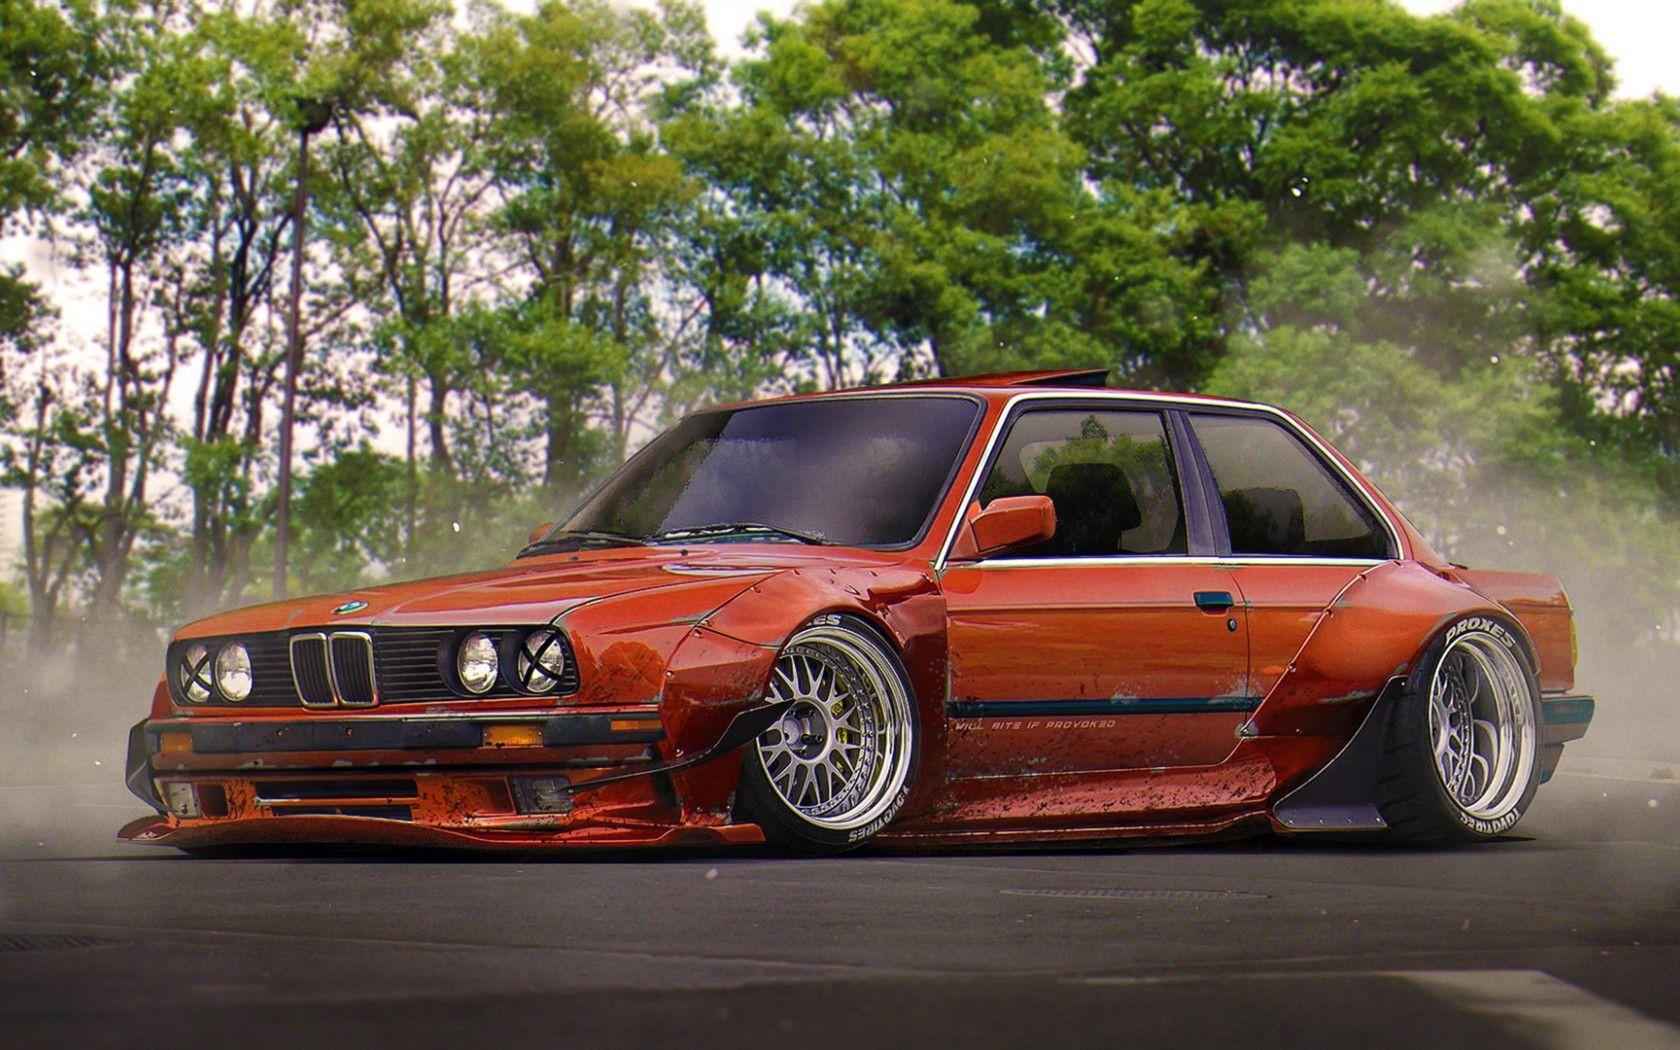 Download wallpaper bmw, m e rb, stance, red, future, tuning